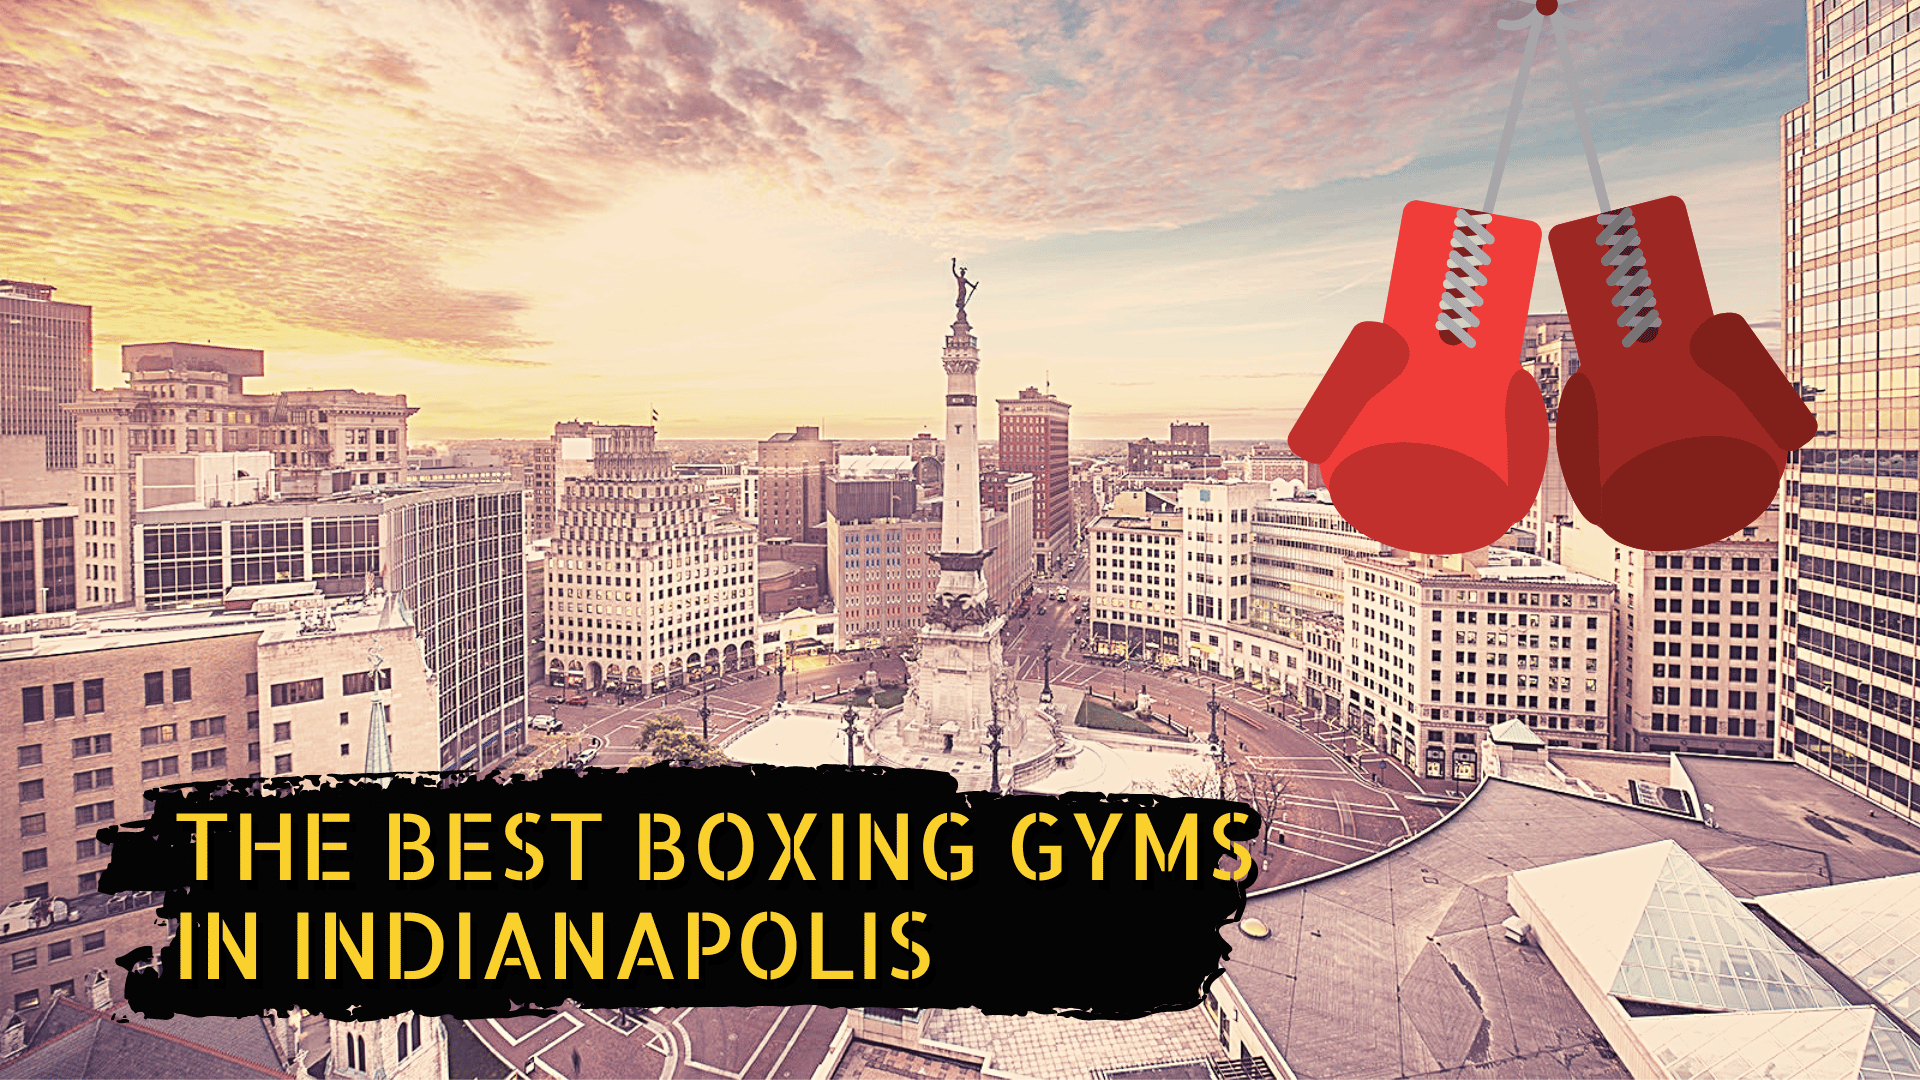 Indianapolis skyline, some boxing gloves, and the title "The best boxing gyms in indianapolis"